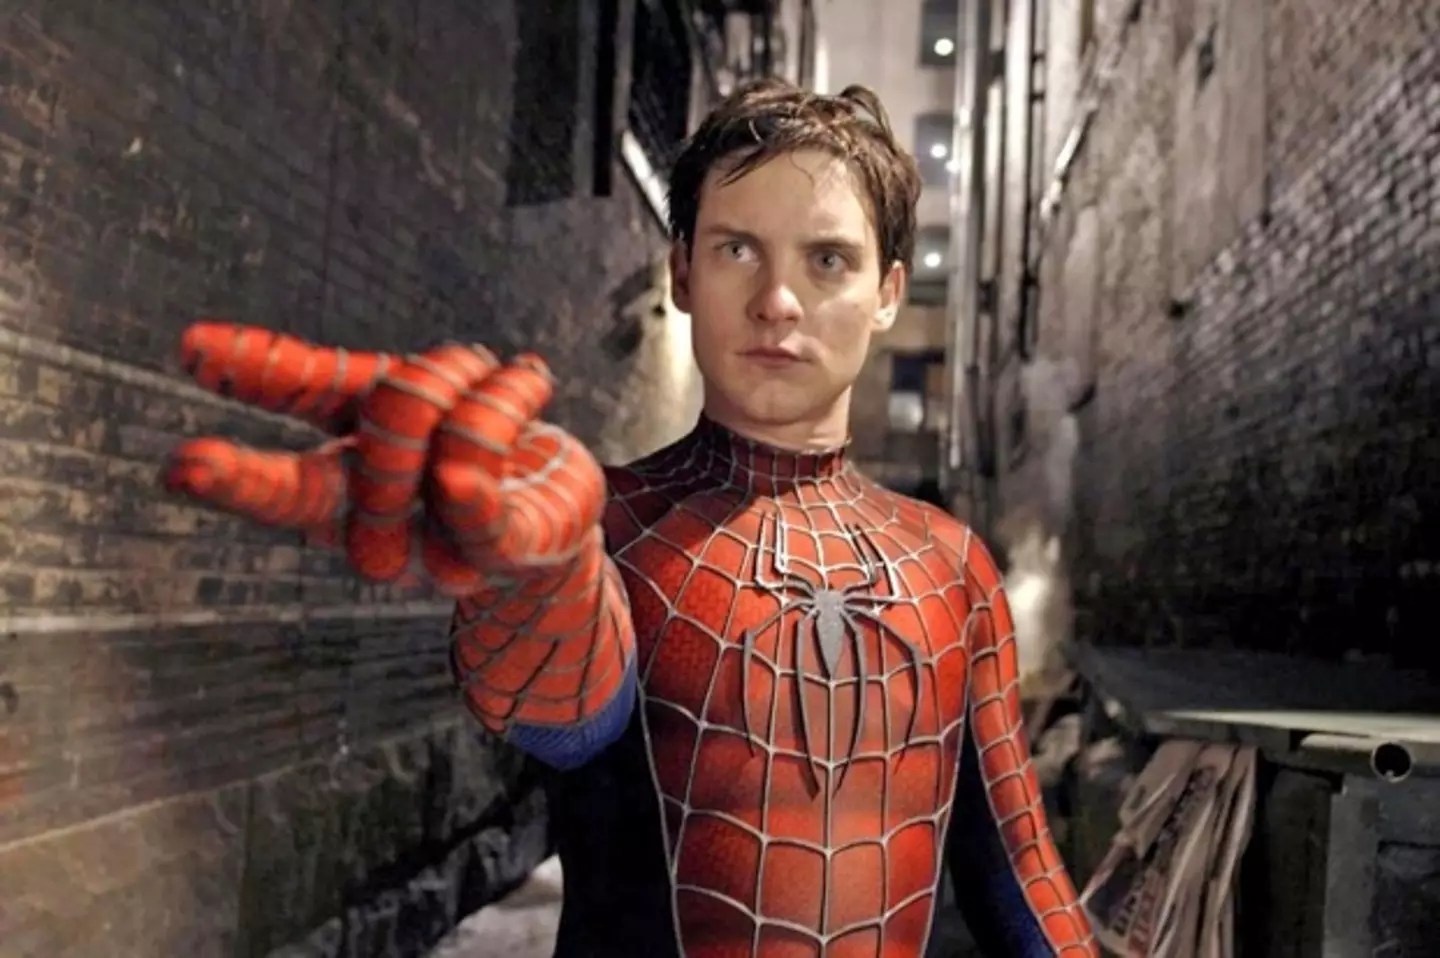 Tobey Maguire as Spider-Man.